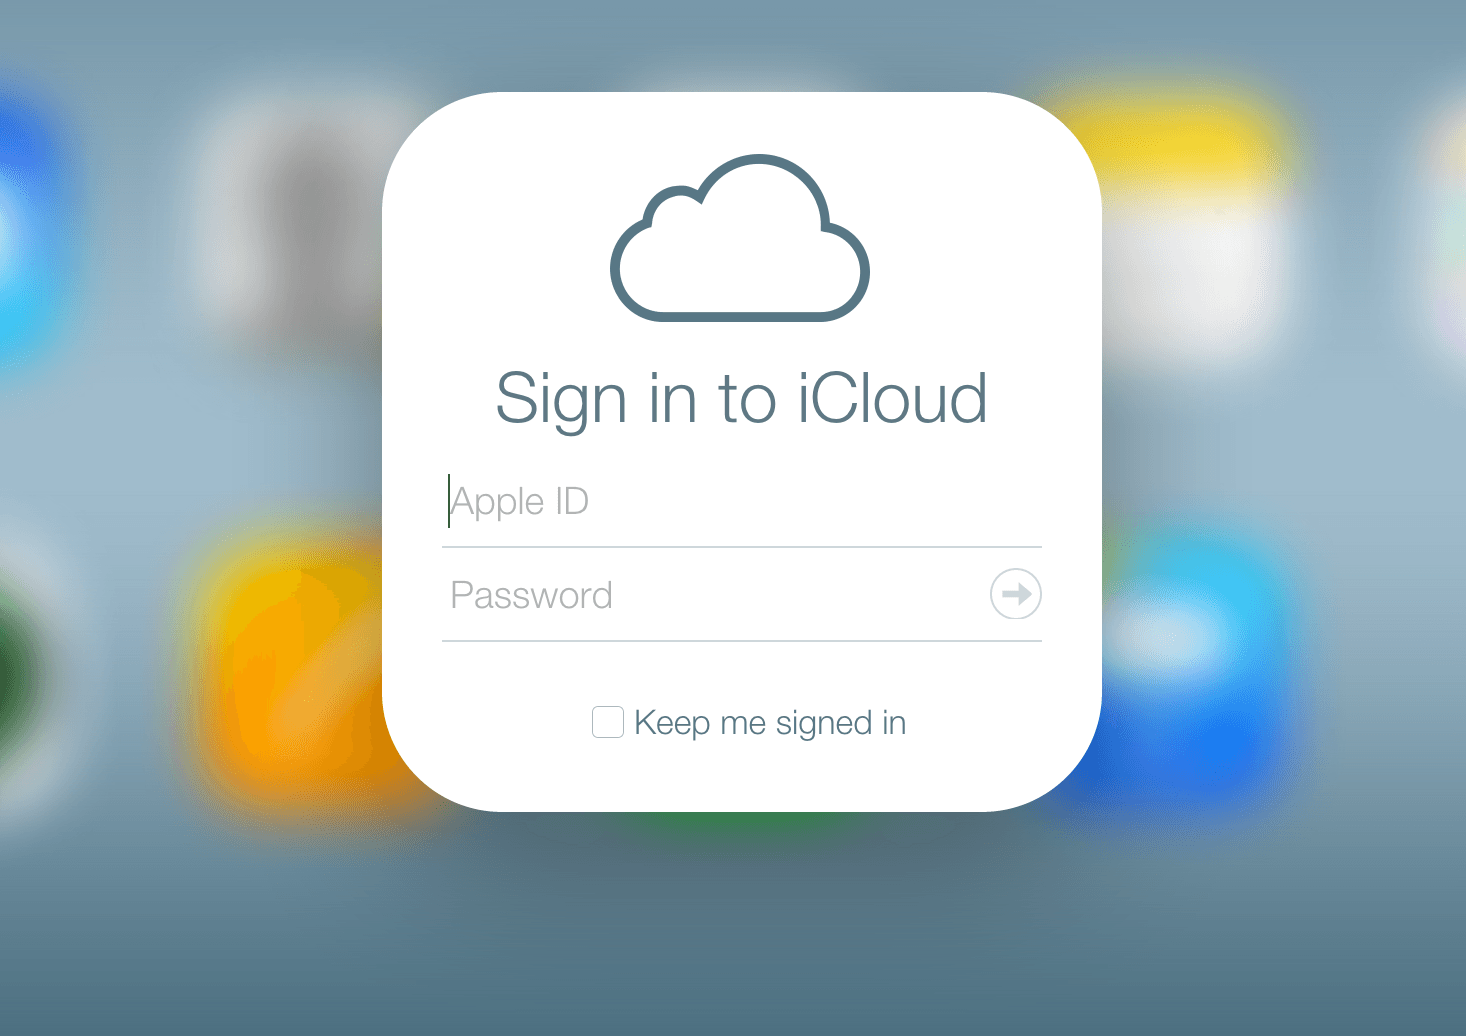 Can I Share iCloud Pics with My Android Friends?